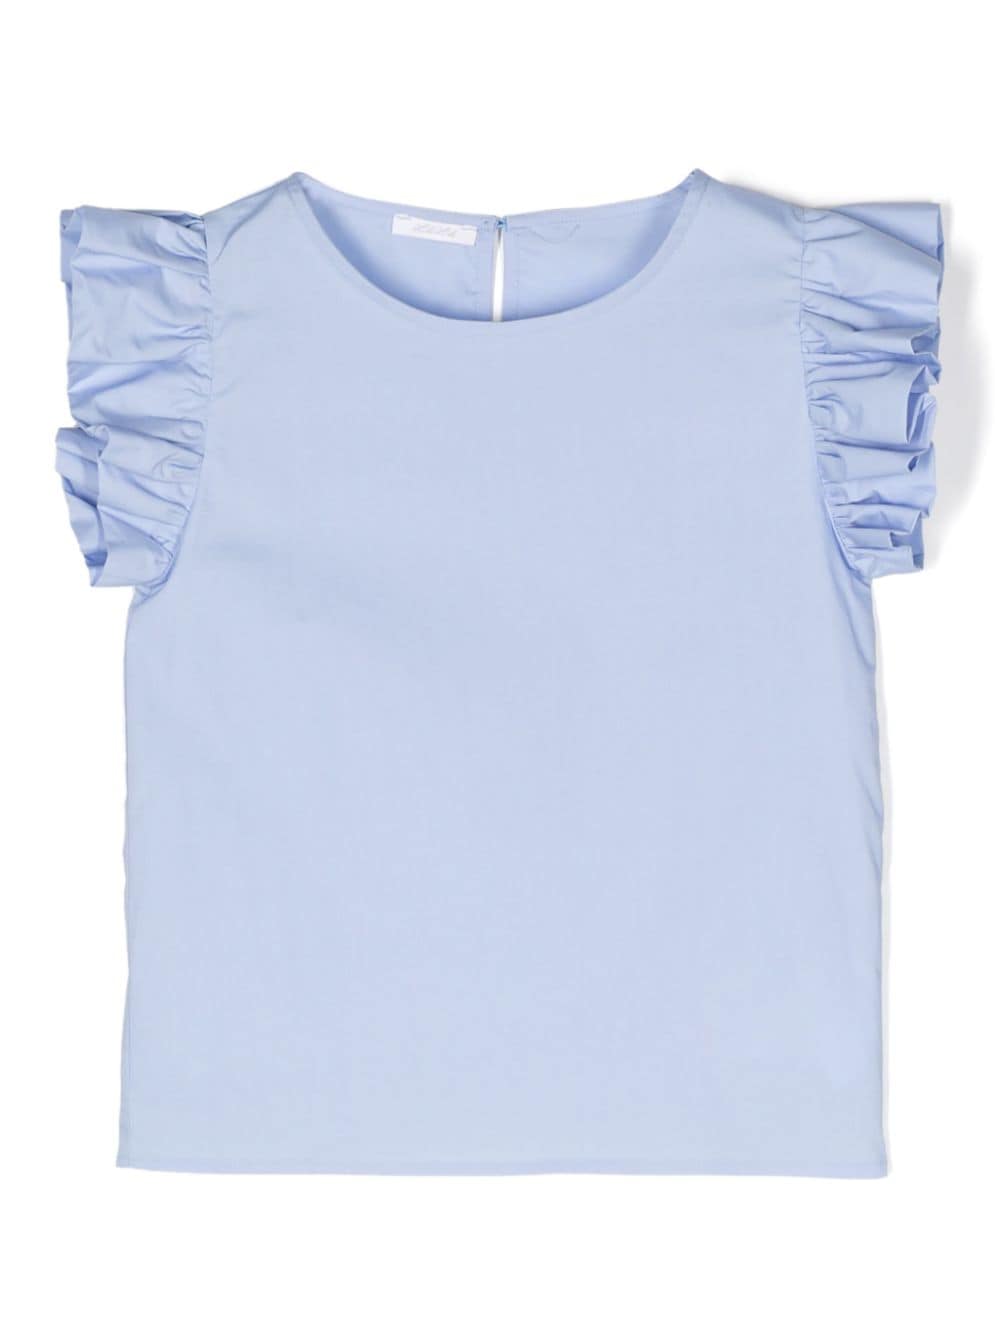 Miss Grant Kids' T-shirt Con Ruches In Light Blue